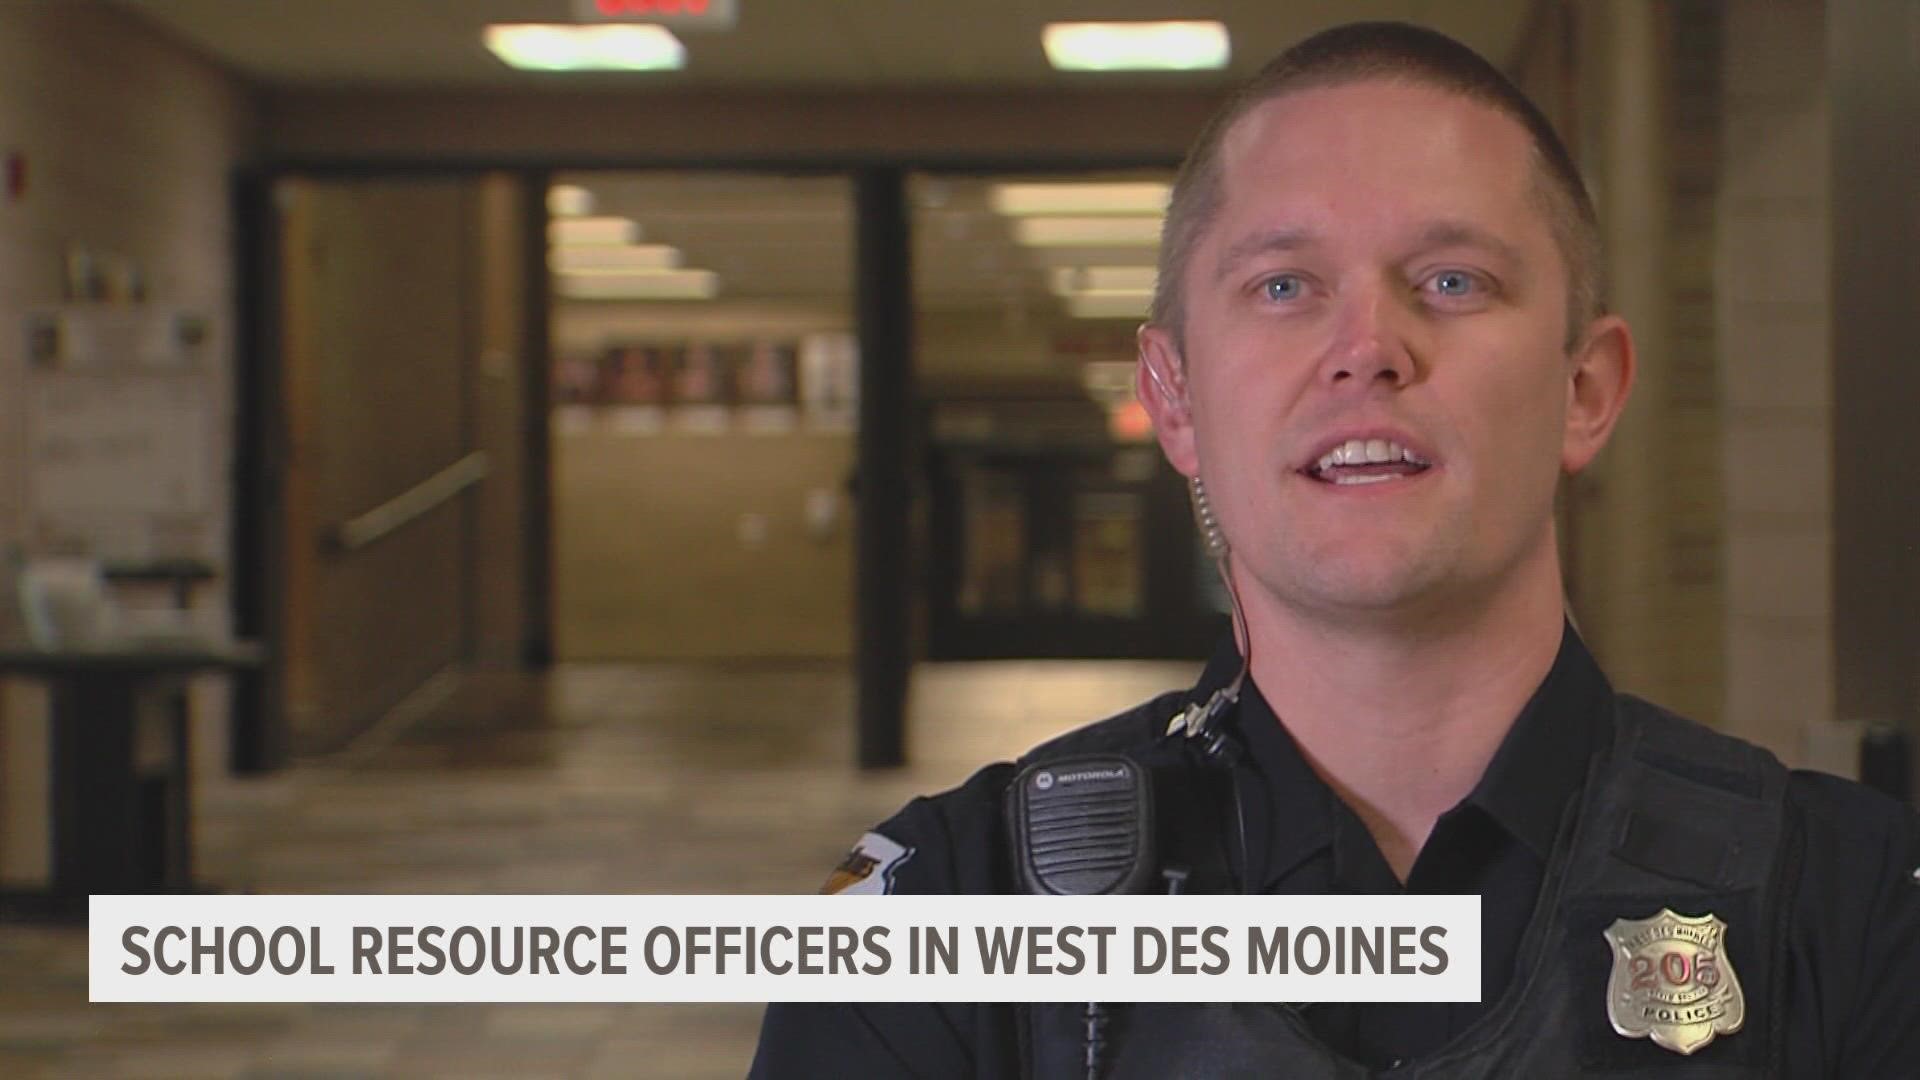 Officer D.J. Frunzar, the school resource officer at Valley High School, hopes connecting with students is just the first step to creating safer schools.